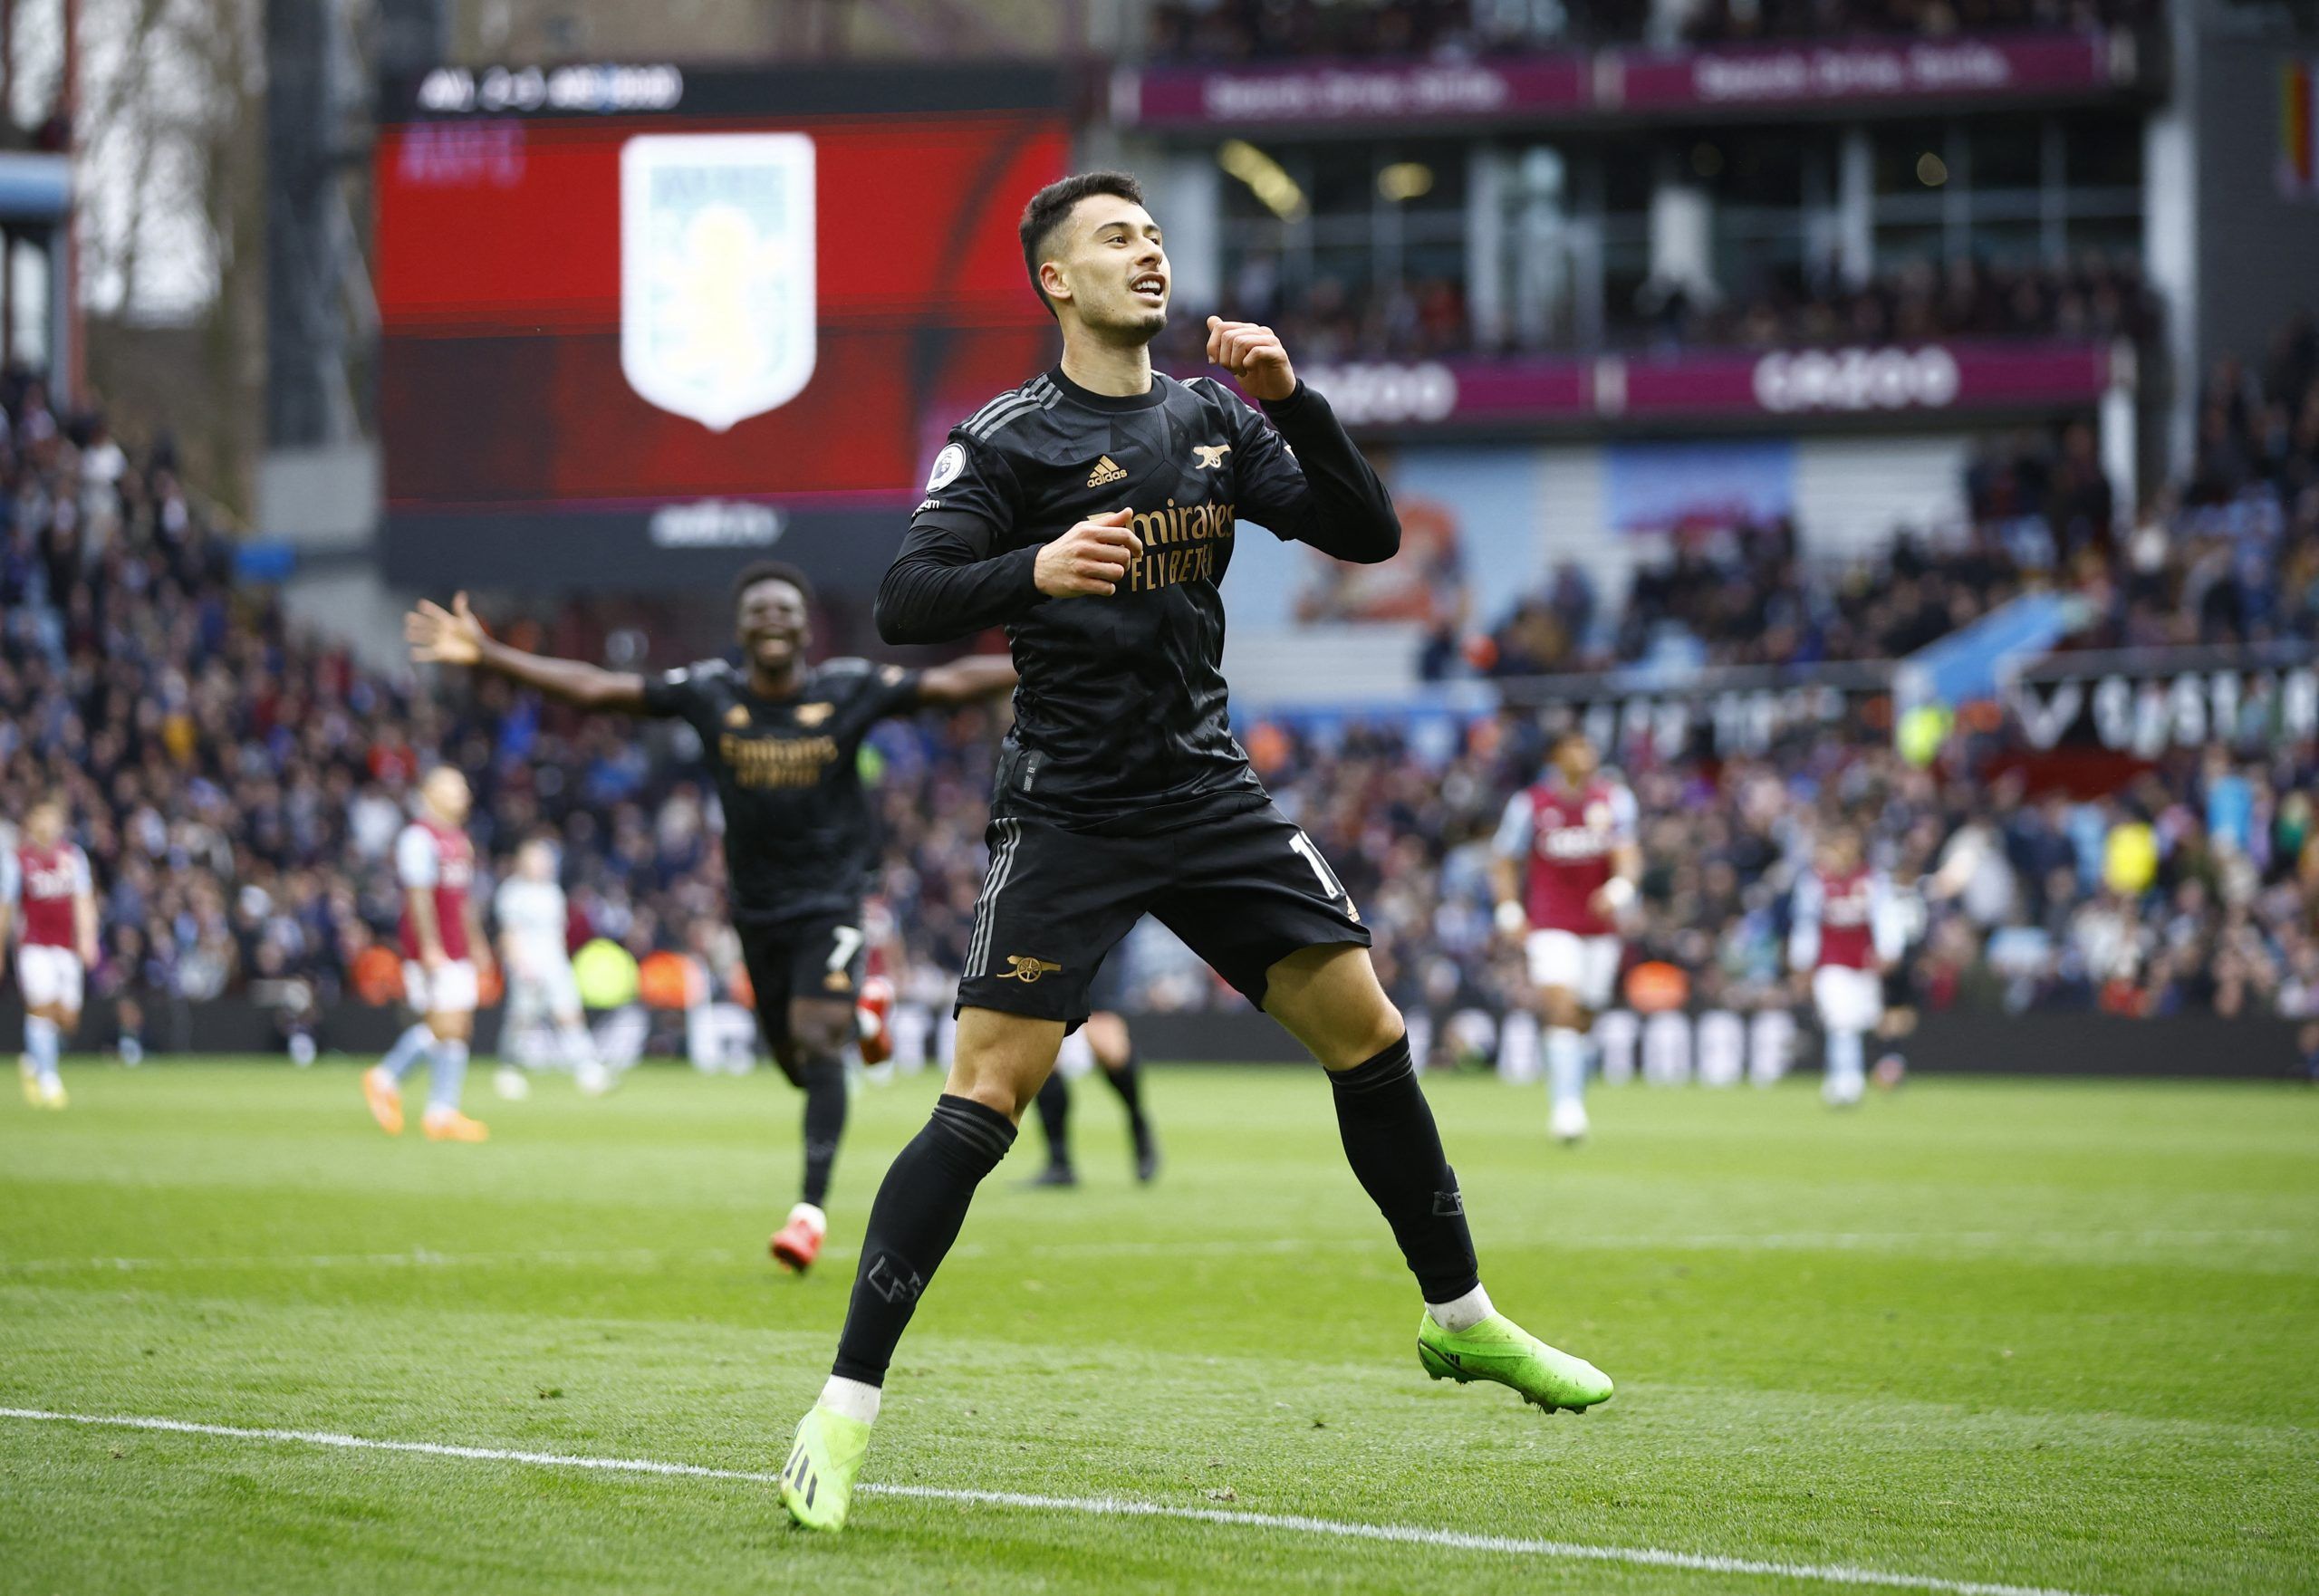 Soccer Football - Premier League - Aston Villa v Arsenal - Villa Park, Birmingham, Britain - February 18, 2023 Arsenal's Gabriel Martinelli celebrates scoring their fourth goal Action Images via Reuters/John Sibley EDITORIAL USE ONLY. No use with unauthorized audio, video, data, fixture lists, club/league logos or 'live' services. Online in-match use limited to 75 images, no video emulation. No use in betting, games or single club /league/player publications.  Please contact your account represe